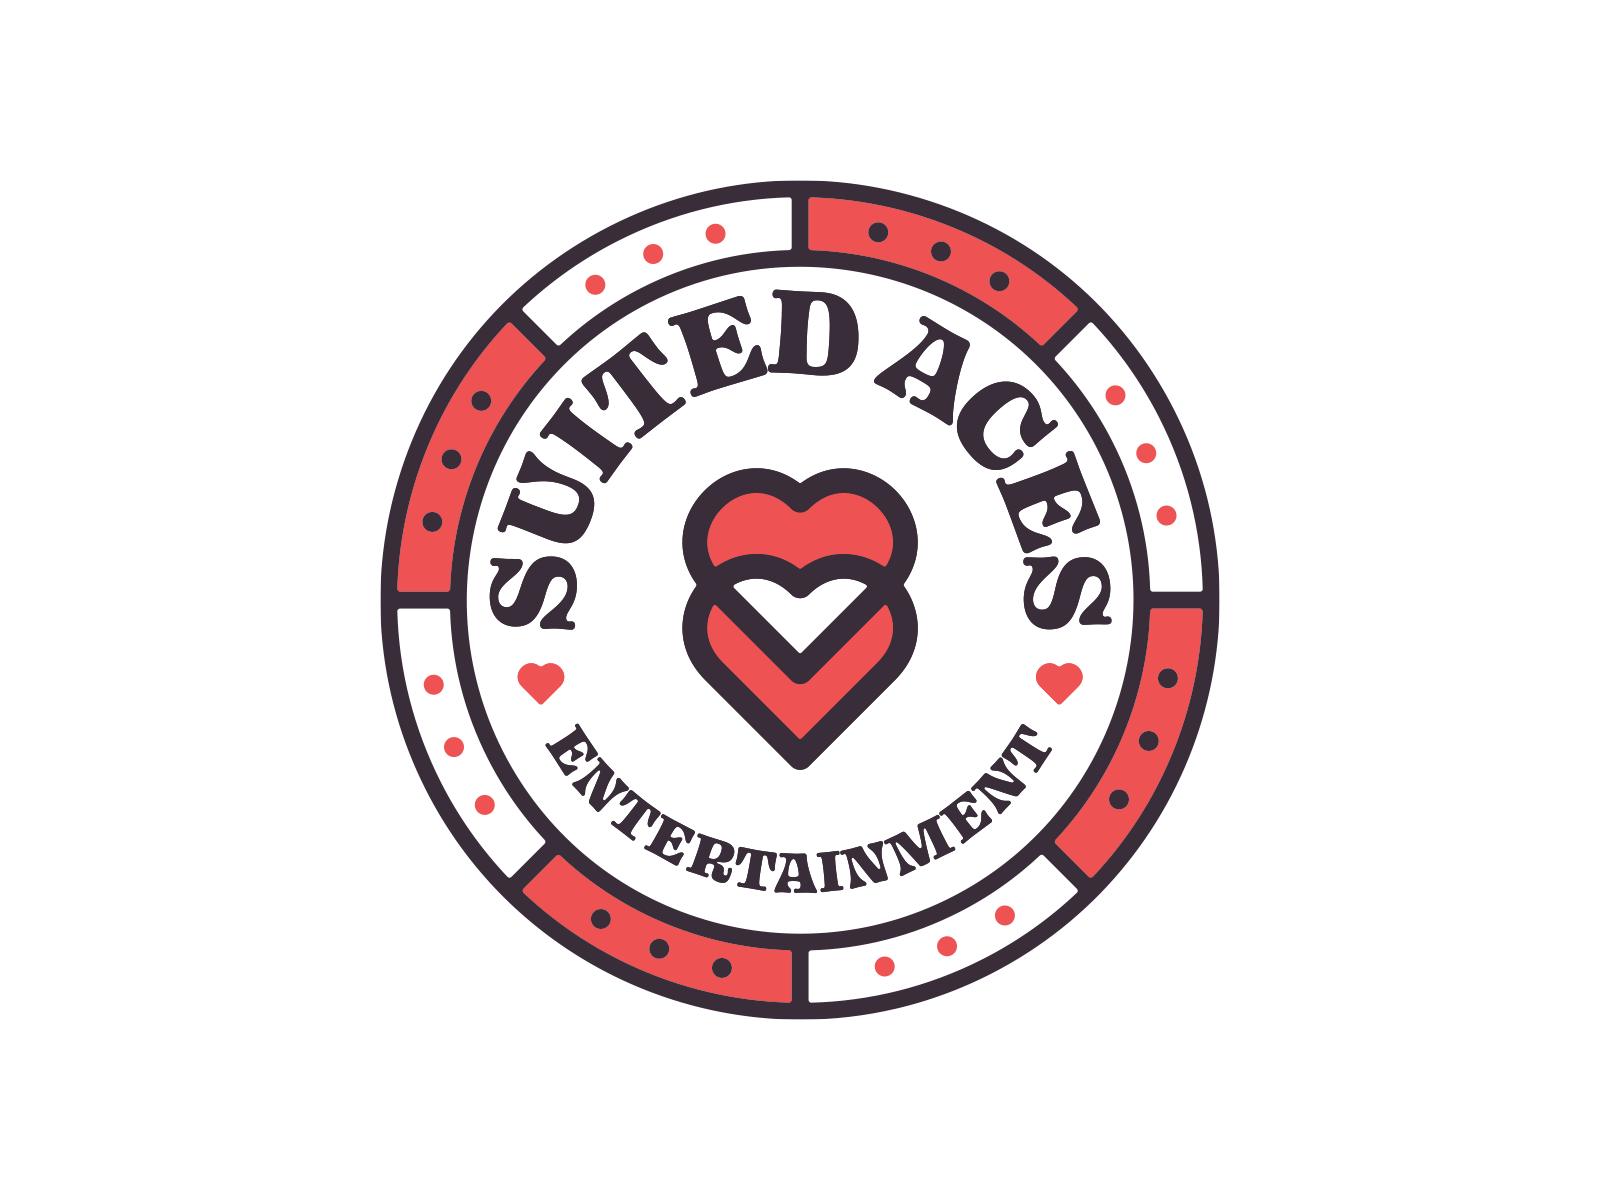 Suited Aces ace badge cards casino entertainment heart logo logo design poker typography